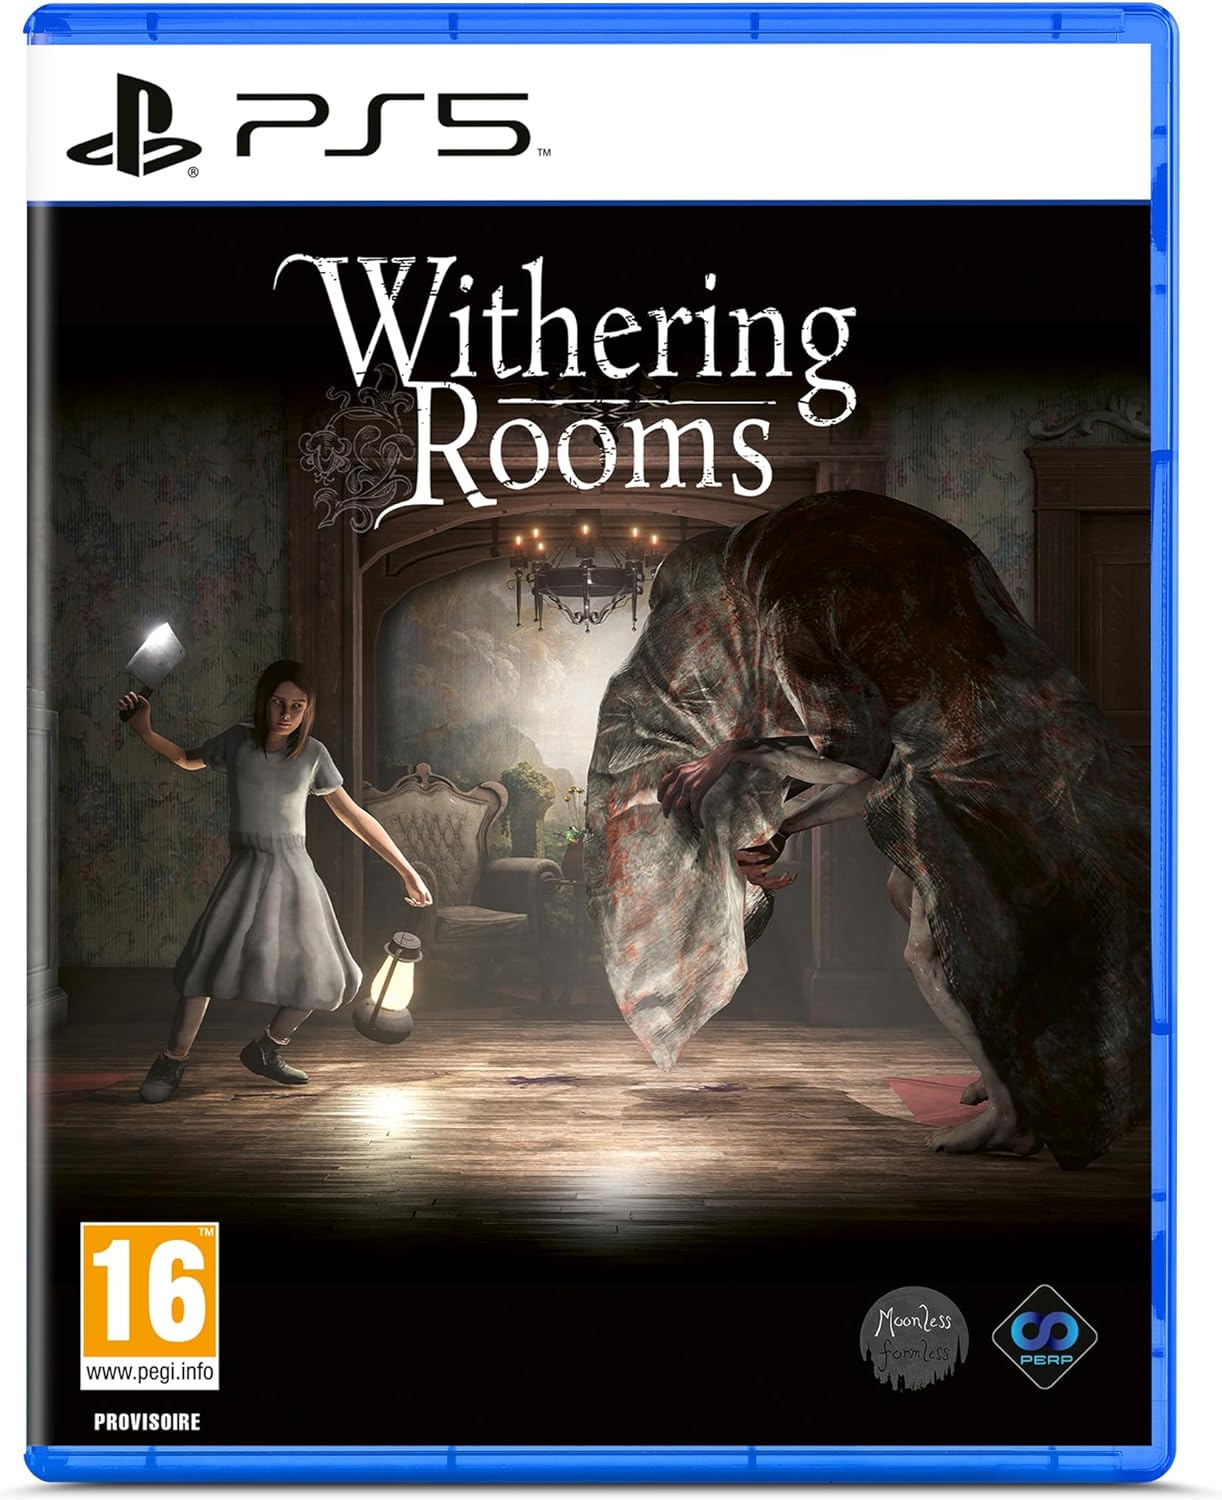 EAN : 5061005781269 - Withering Rooms